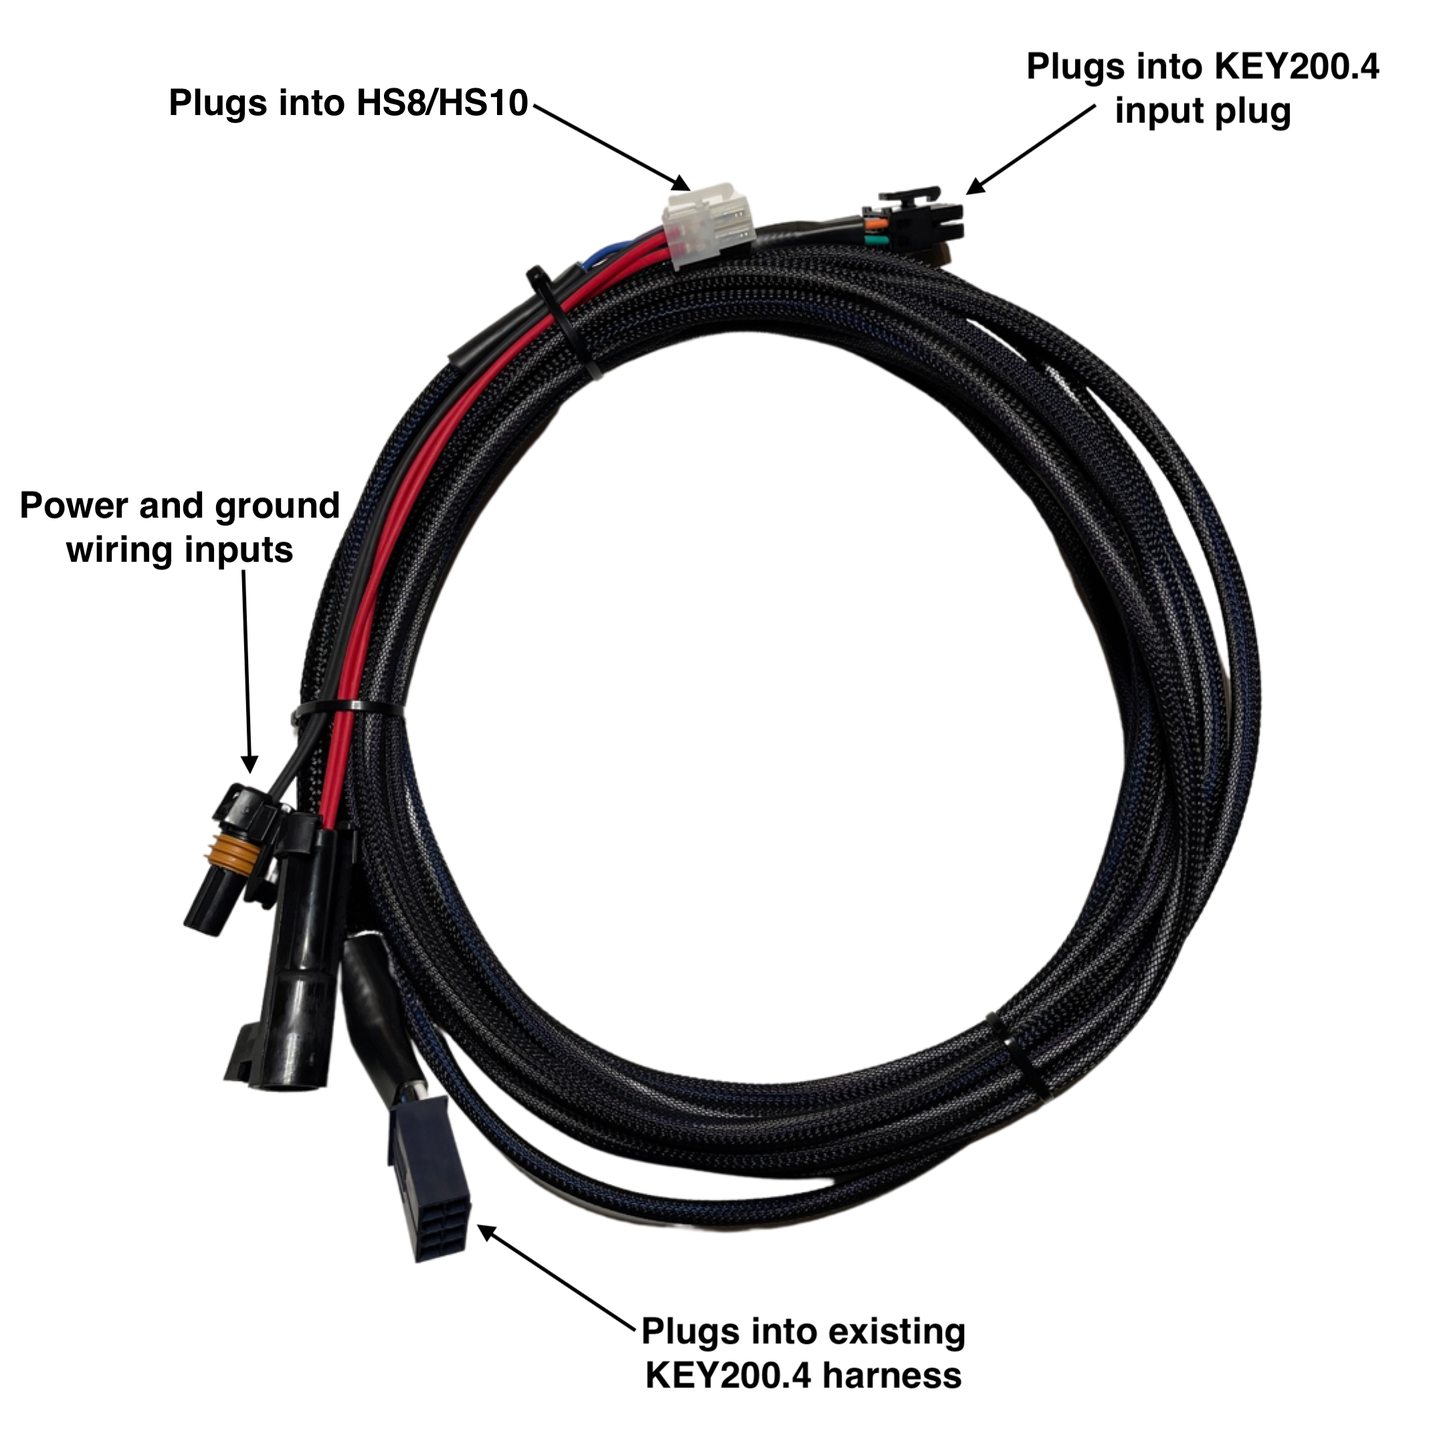 Subwoofer Expansion Harness (Integrates w/ KEY200.4 Harness)